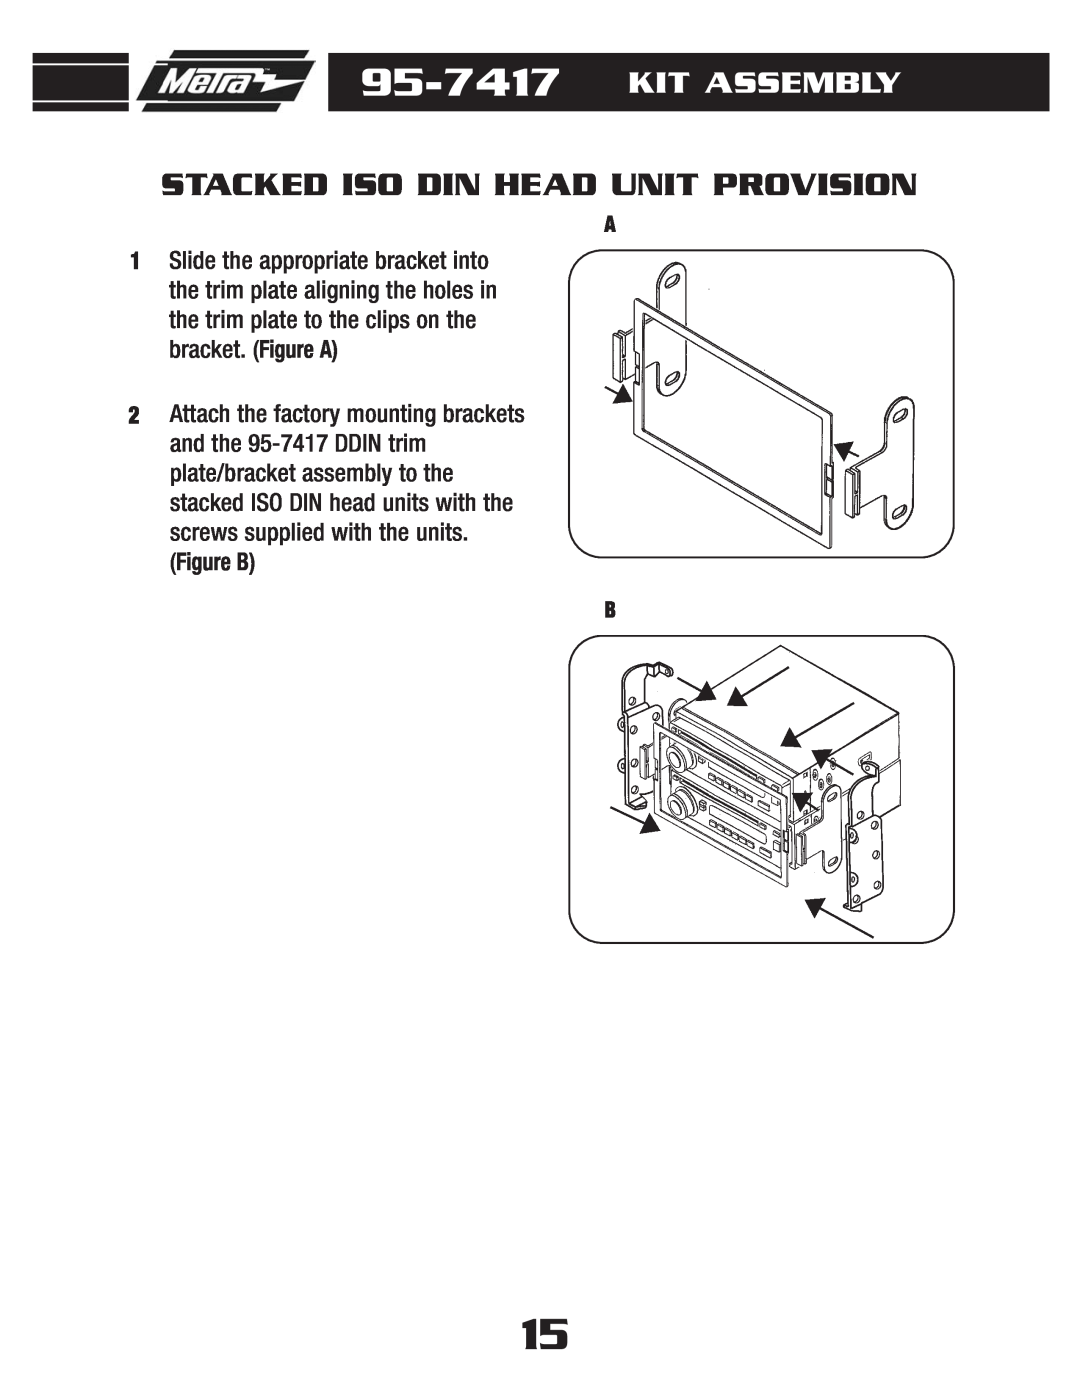 Metra Electronics 95-7417 installation instructions Stacked Iso Din Head Unit Provision, Kit Assembly 